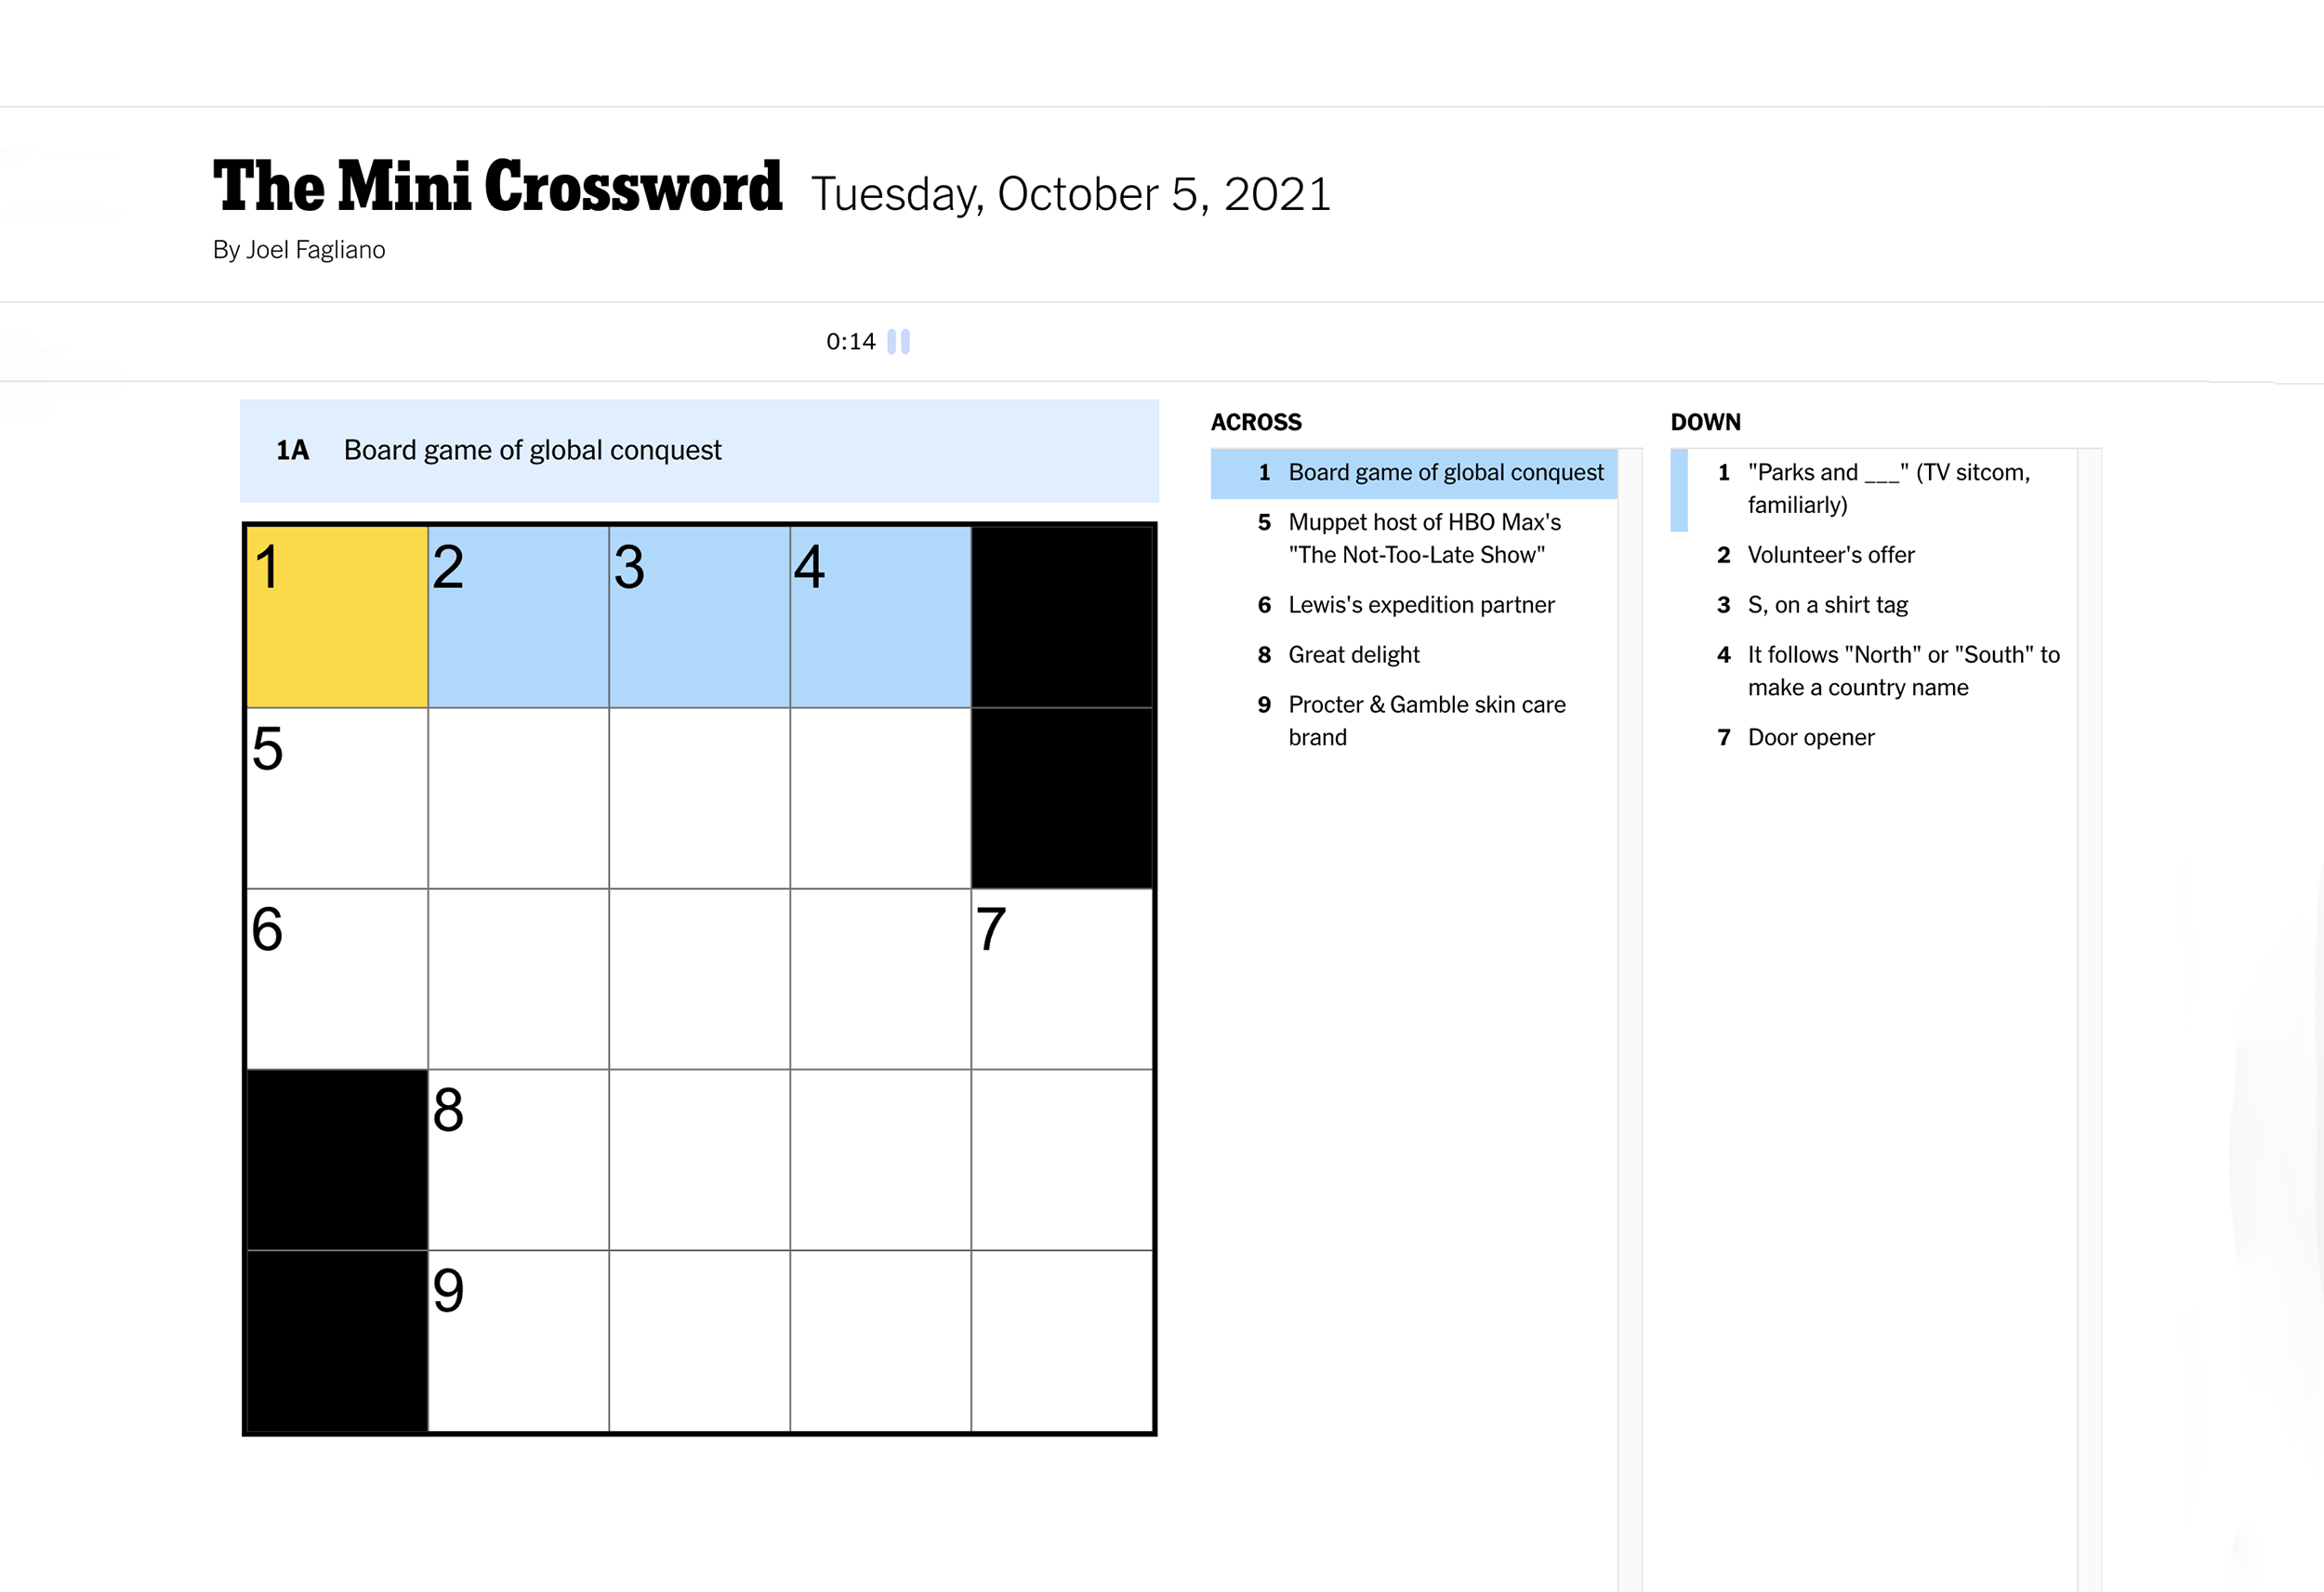 Crosswords and Games - The Washington Post